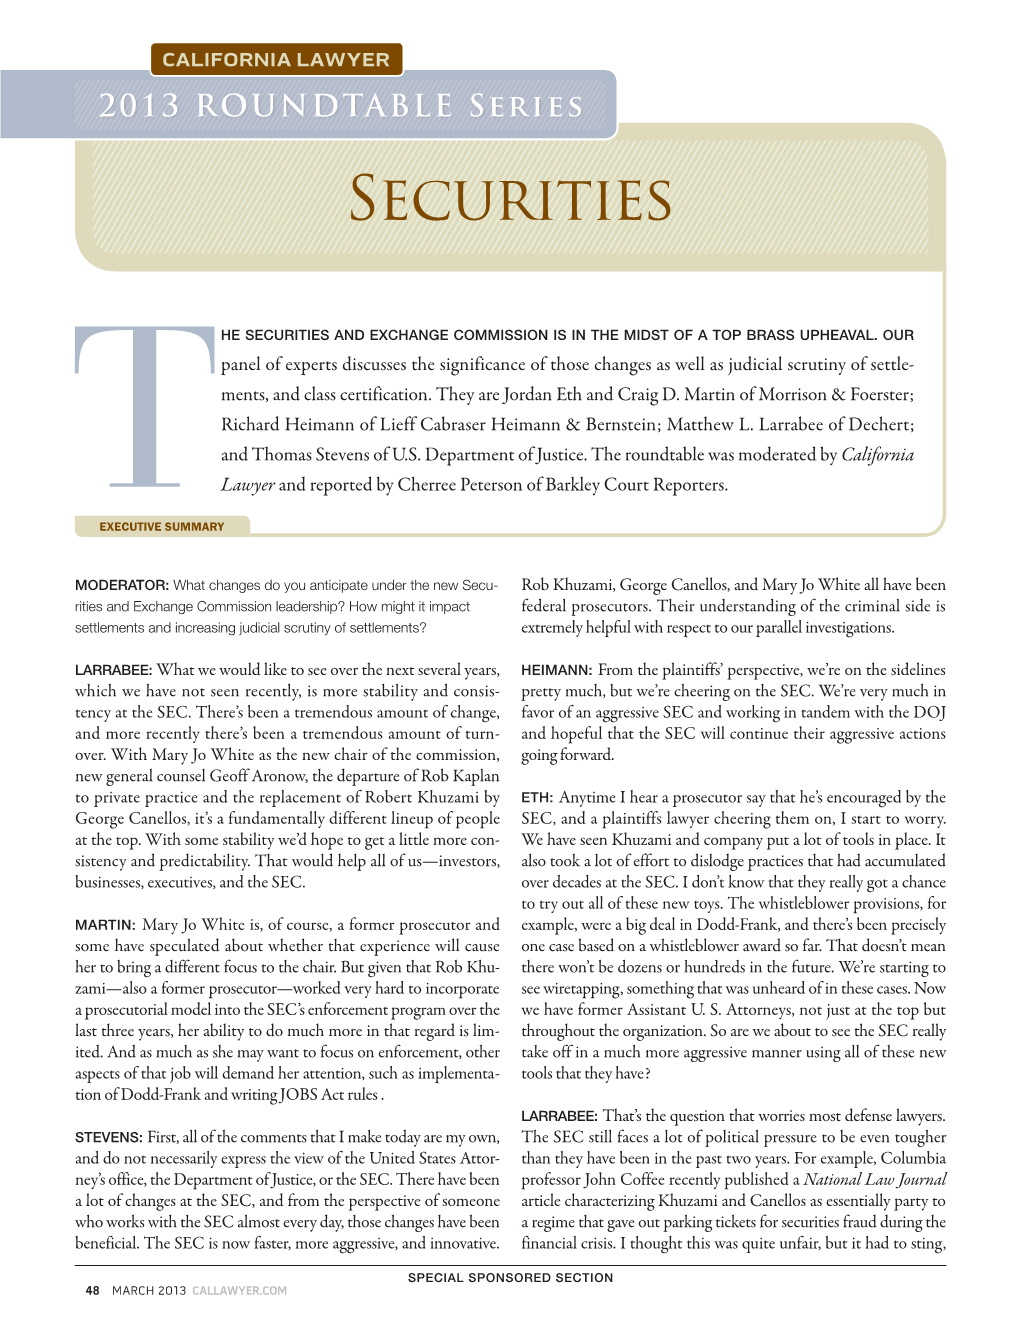 CALIFORNIA LAWYER 2013 ROUNDTABLE Series Securities